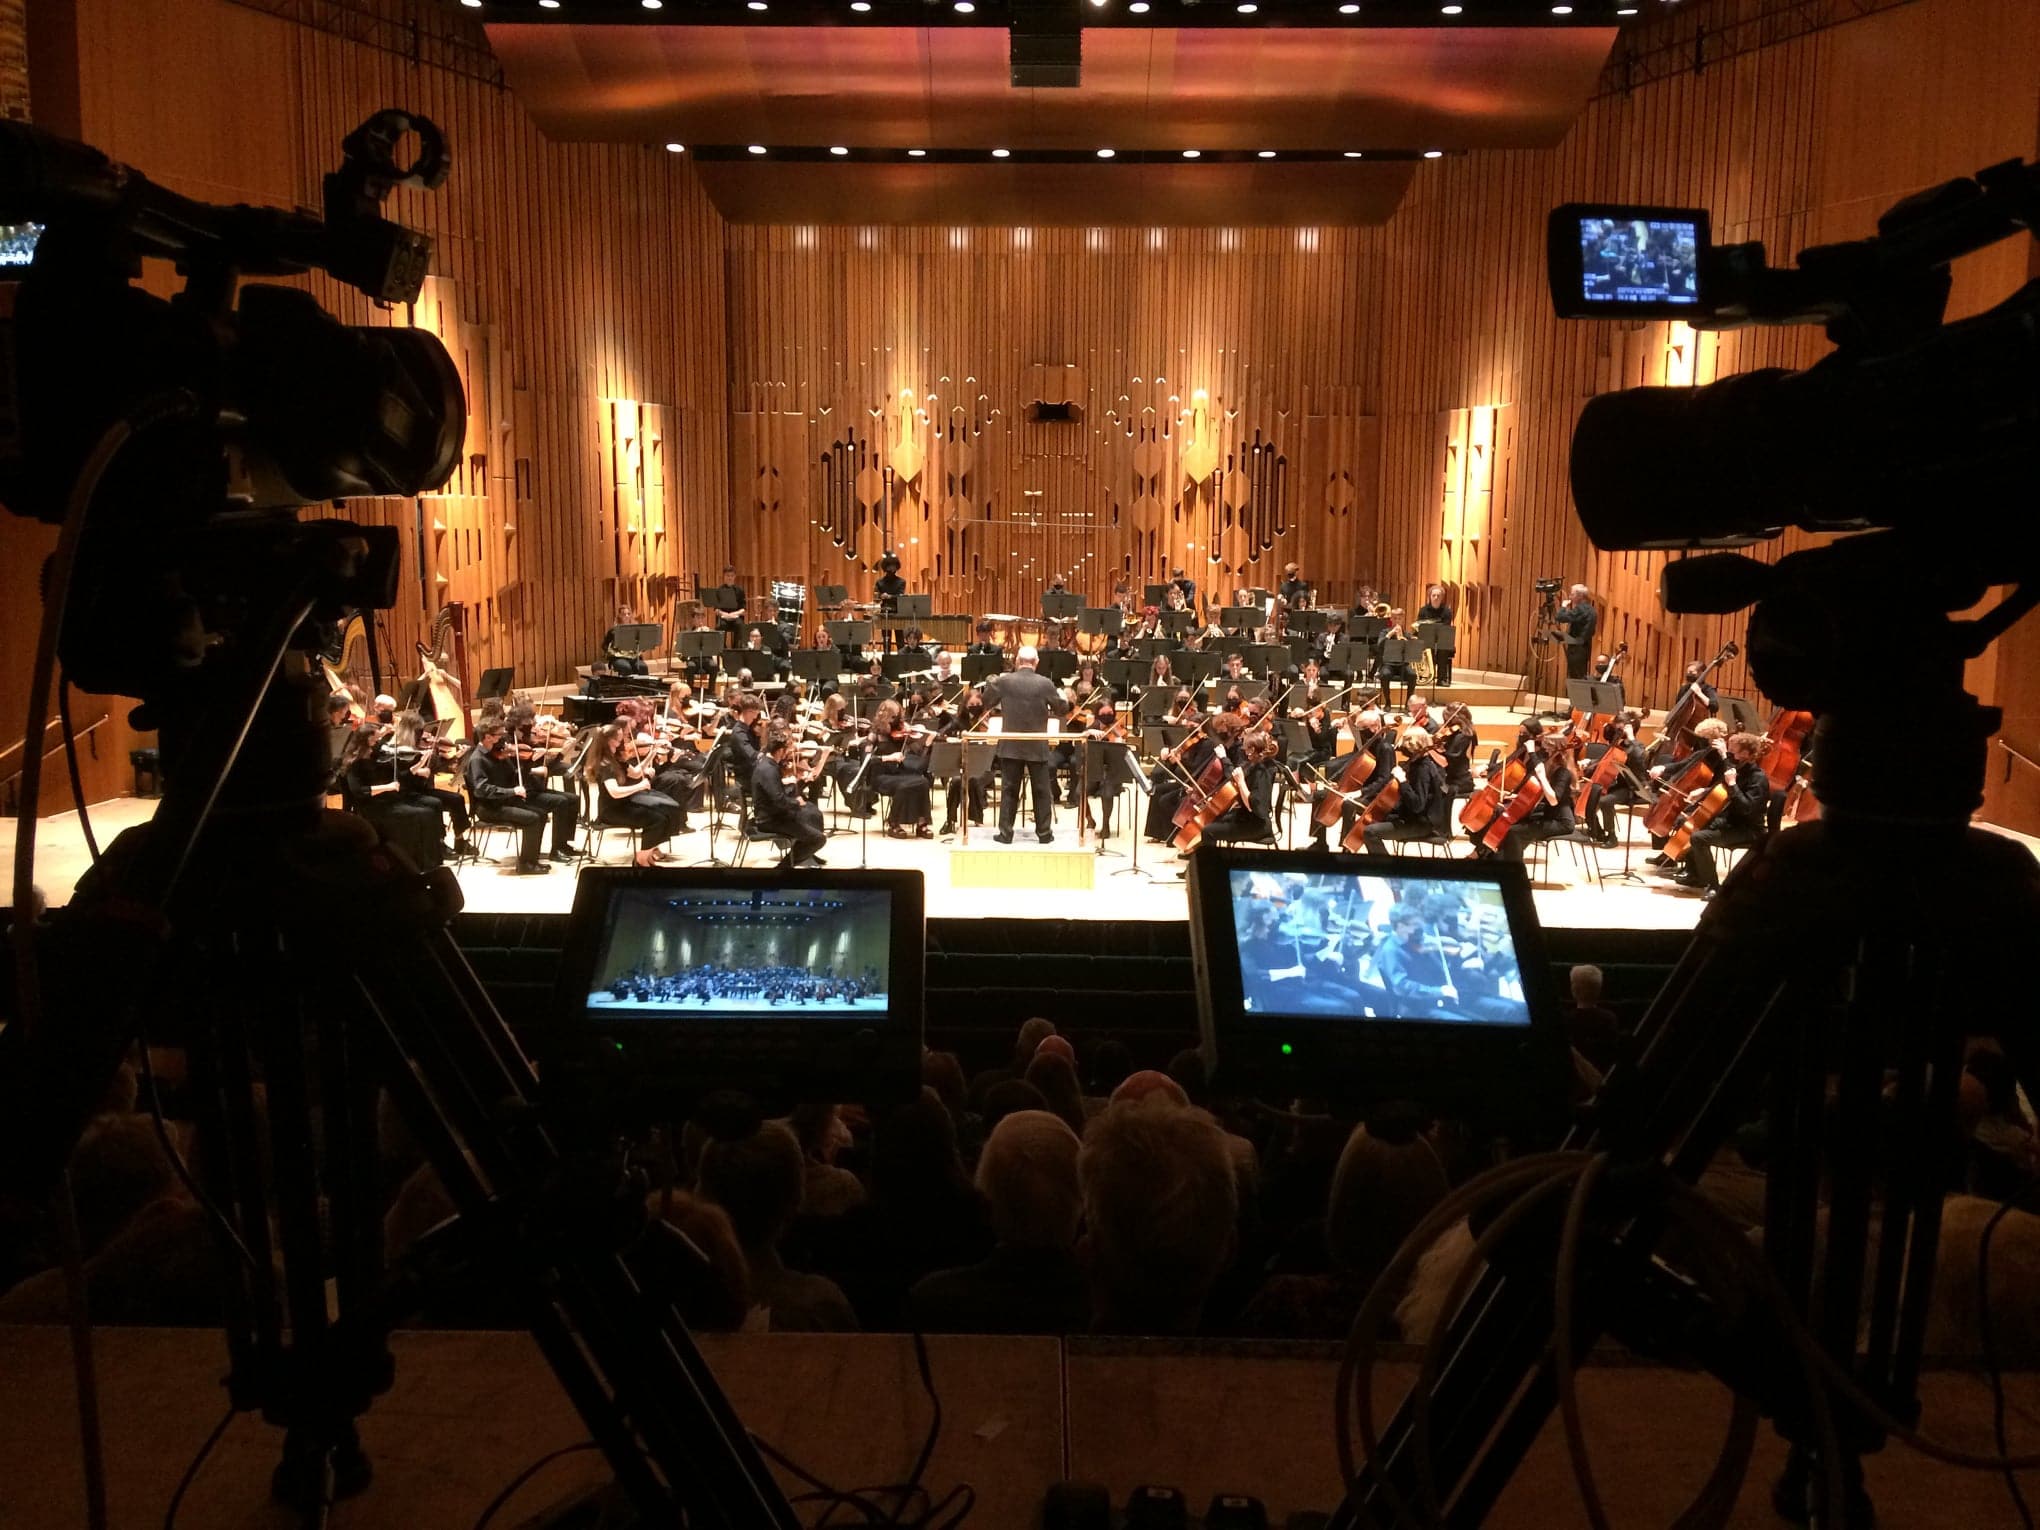 Exclusive: Nightmare continues at the Barbican as conductor is fired